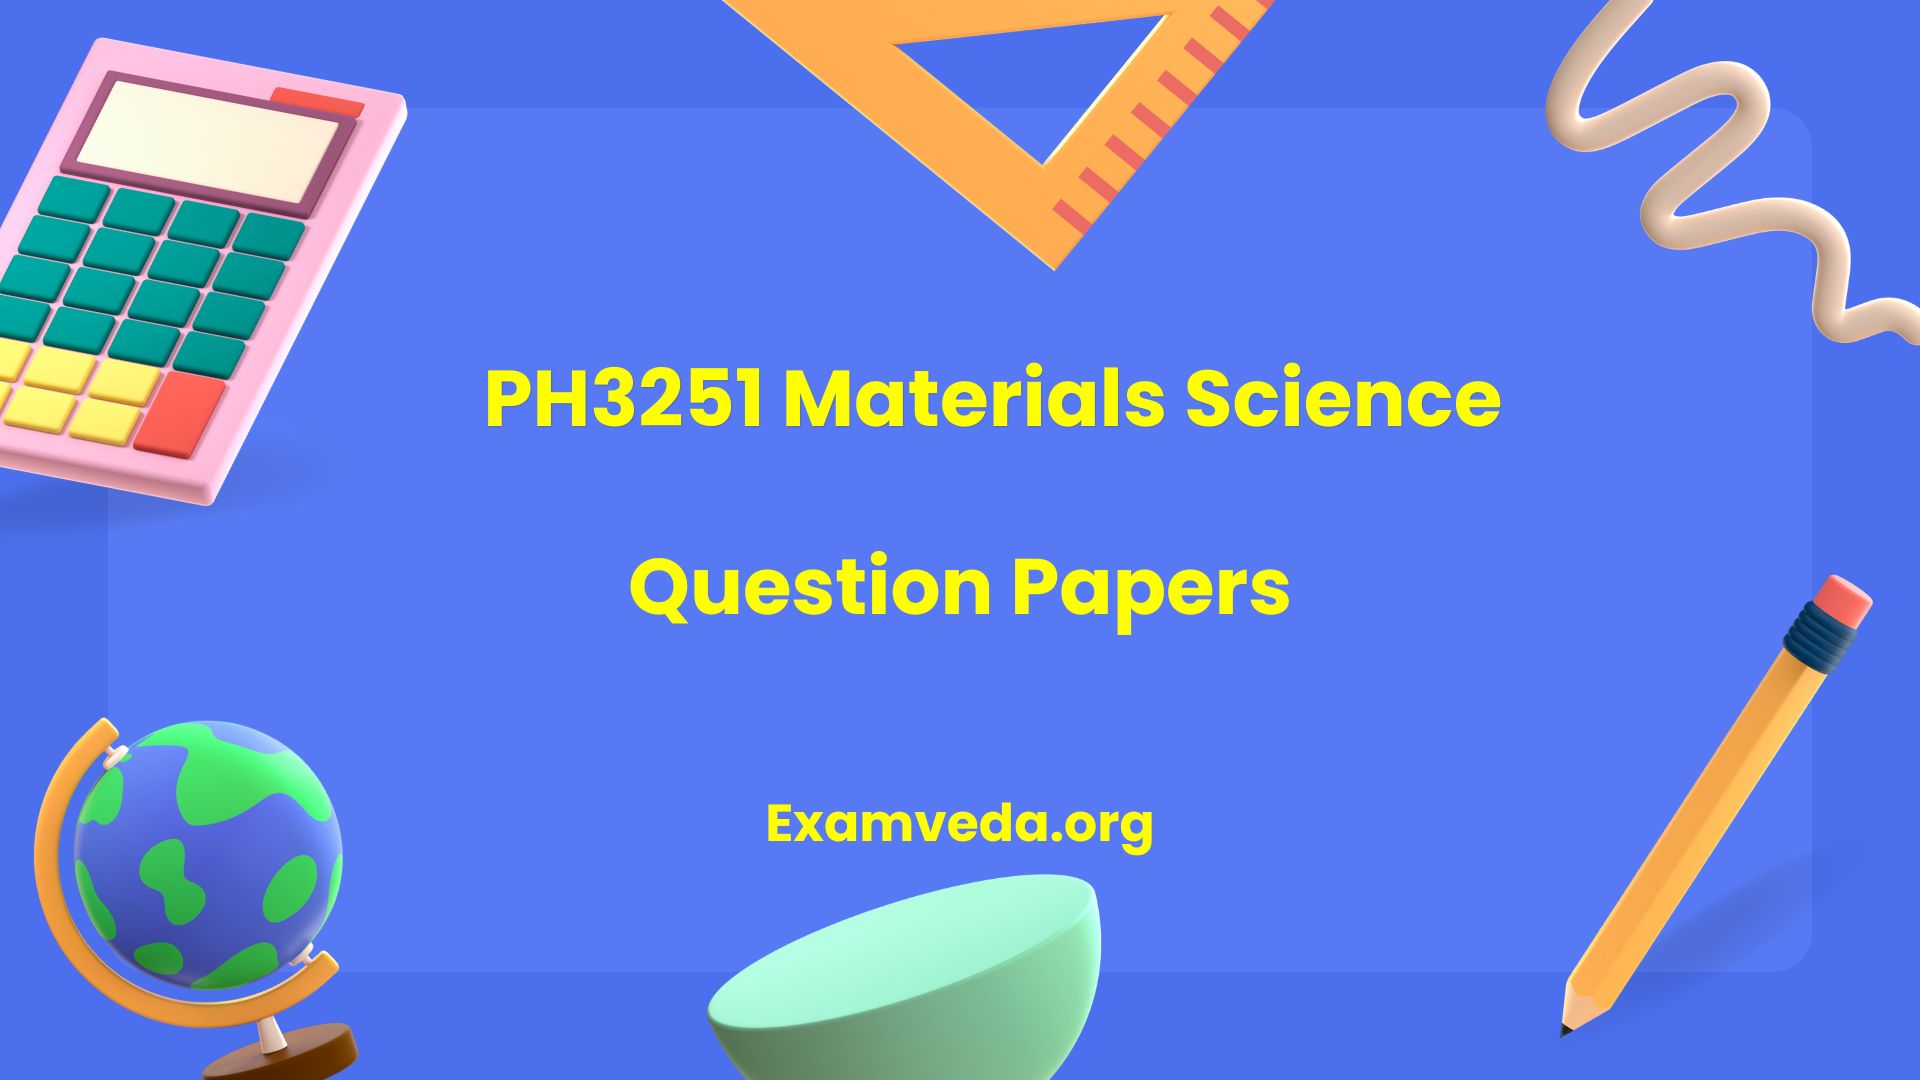 PH3251 Materials Science Question Papers